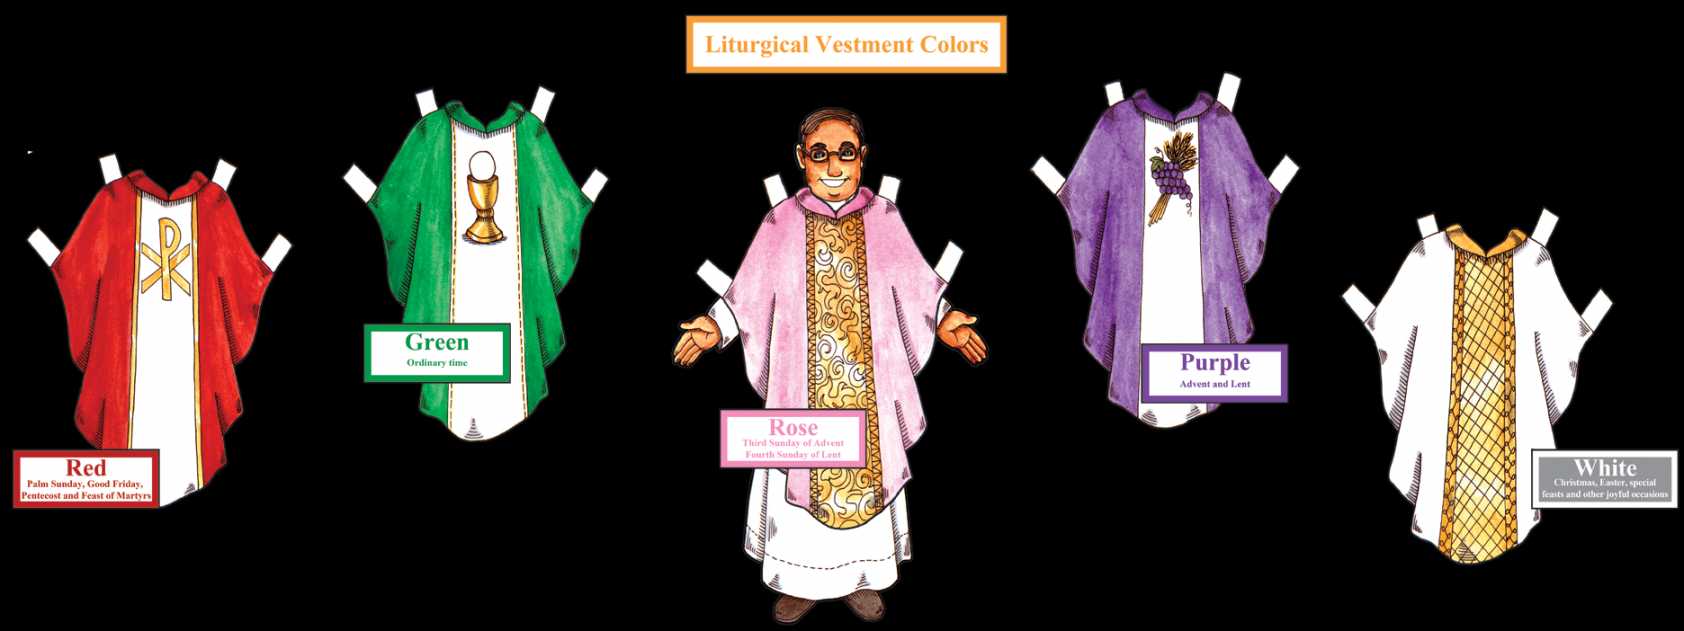 Father Nick and His Vestments - LLCO